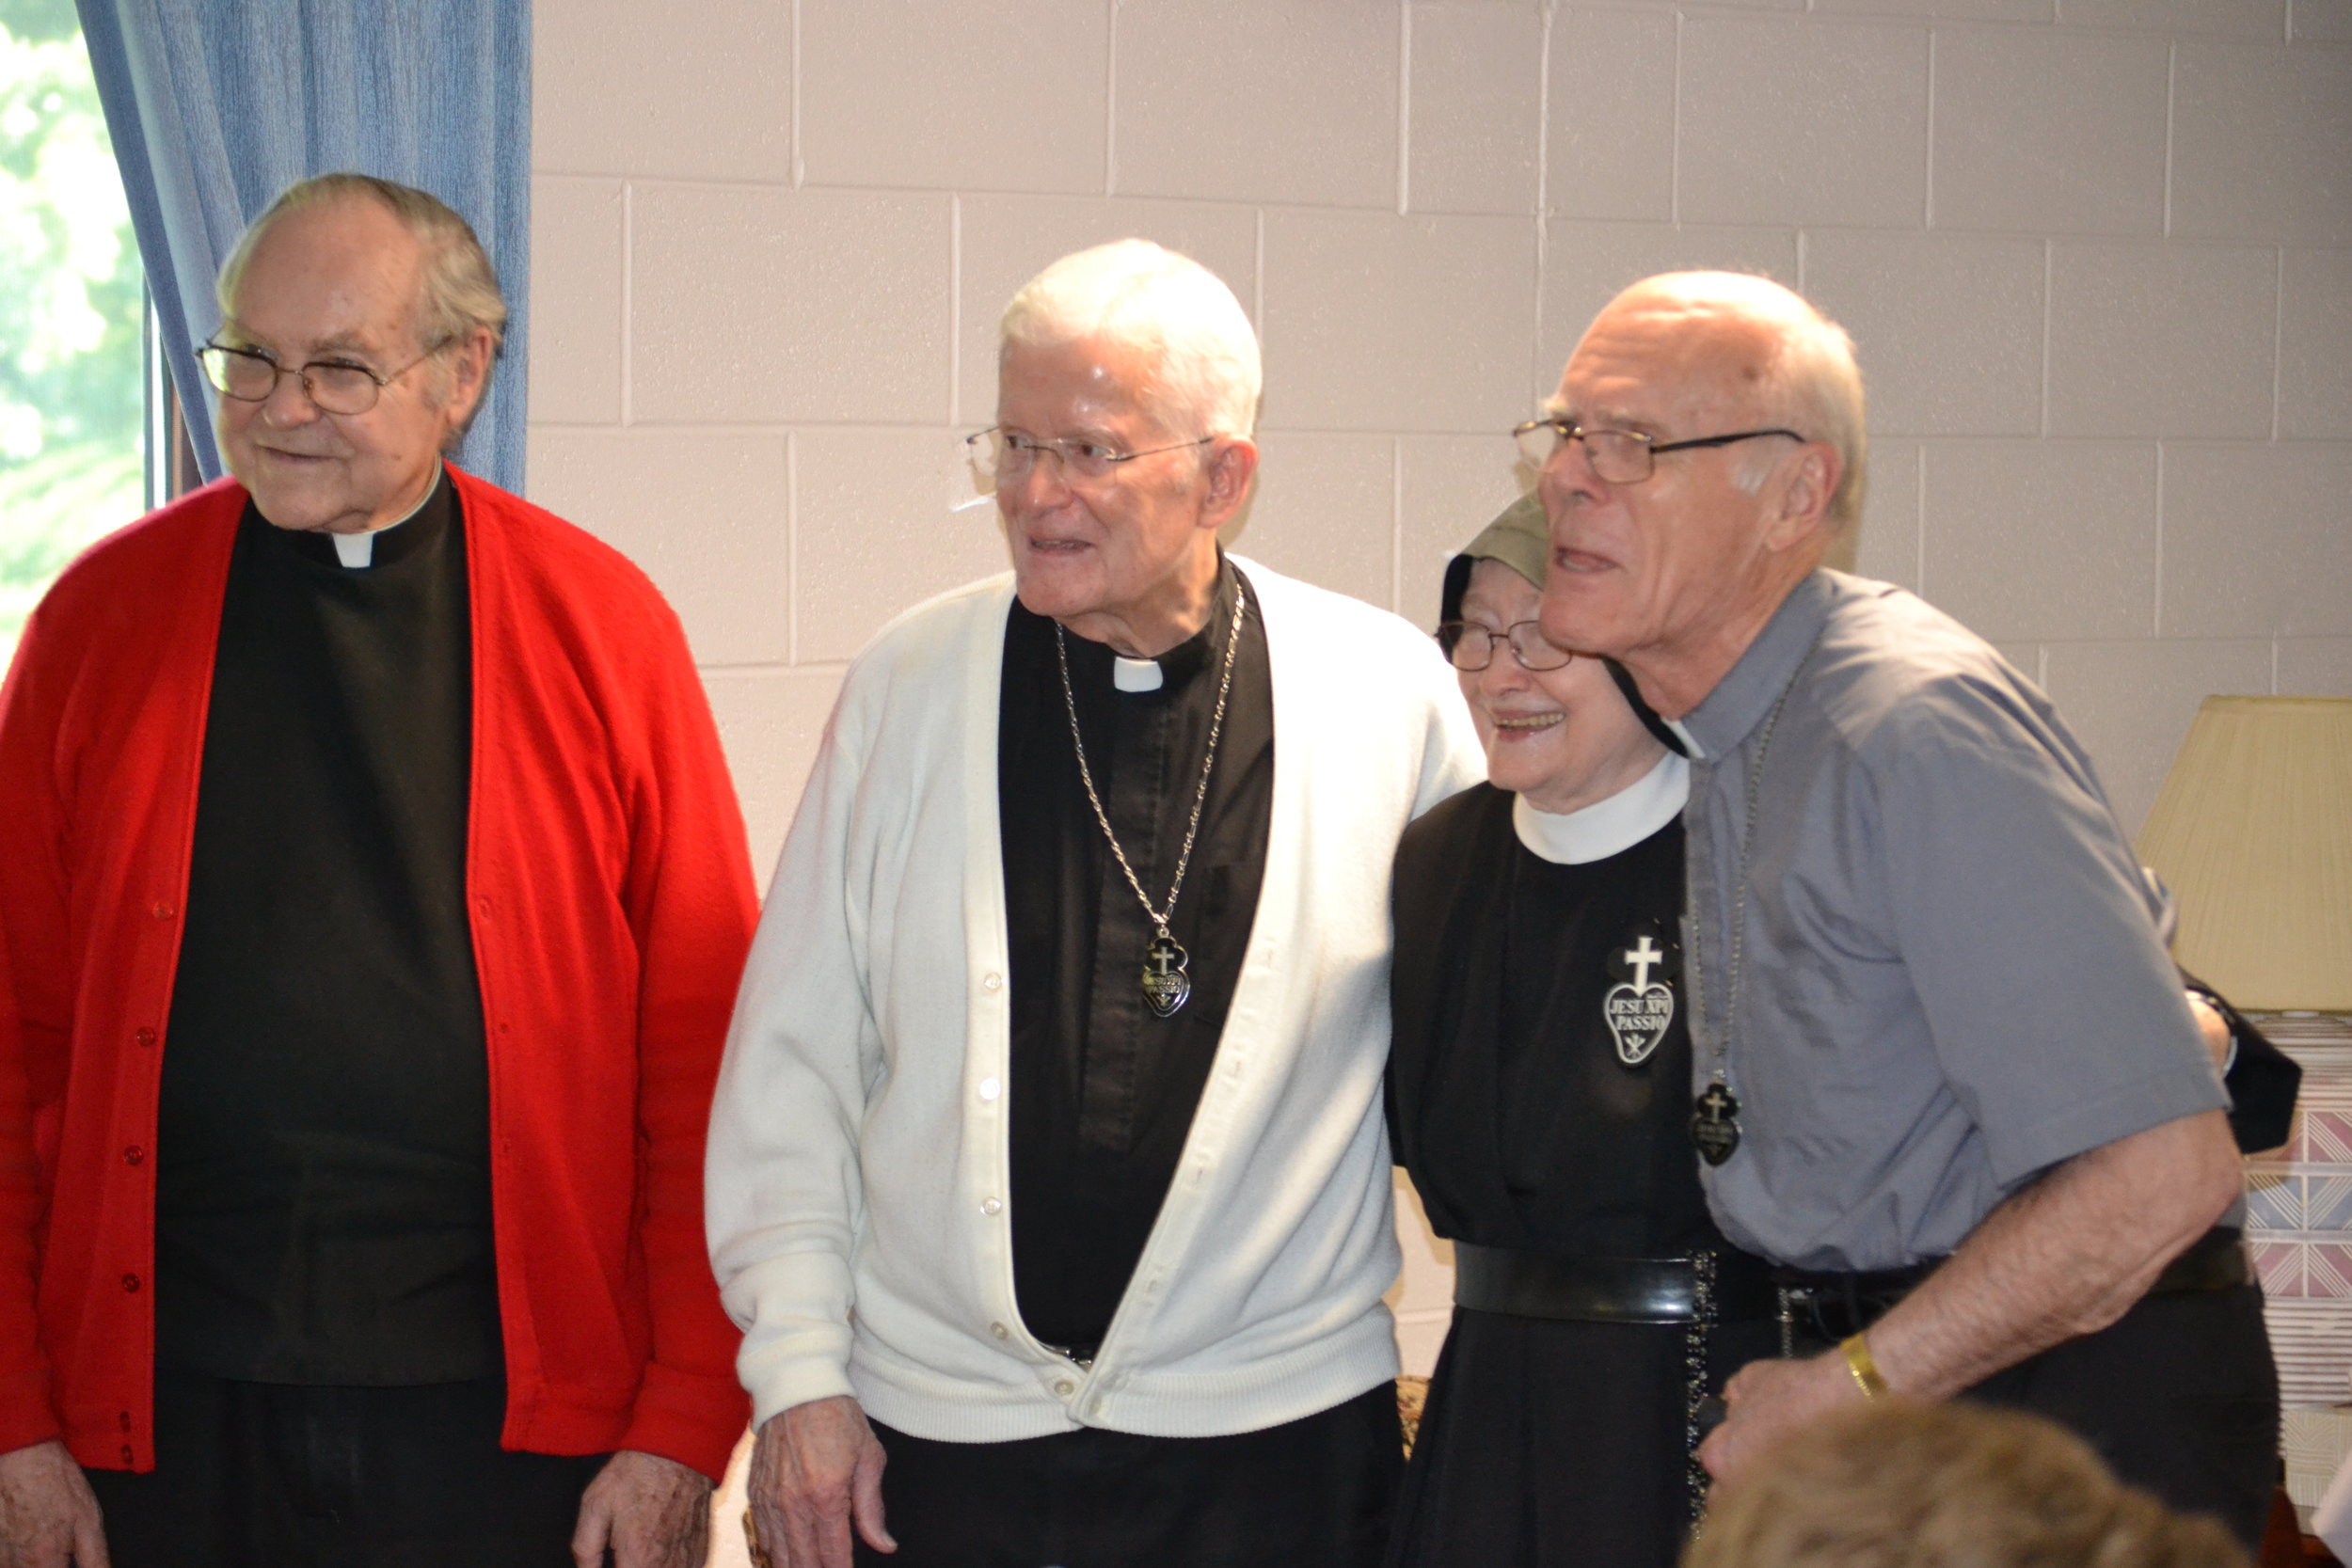 Oblate clergy with Sr. Catherine Marie